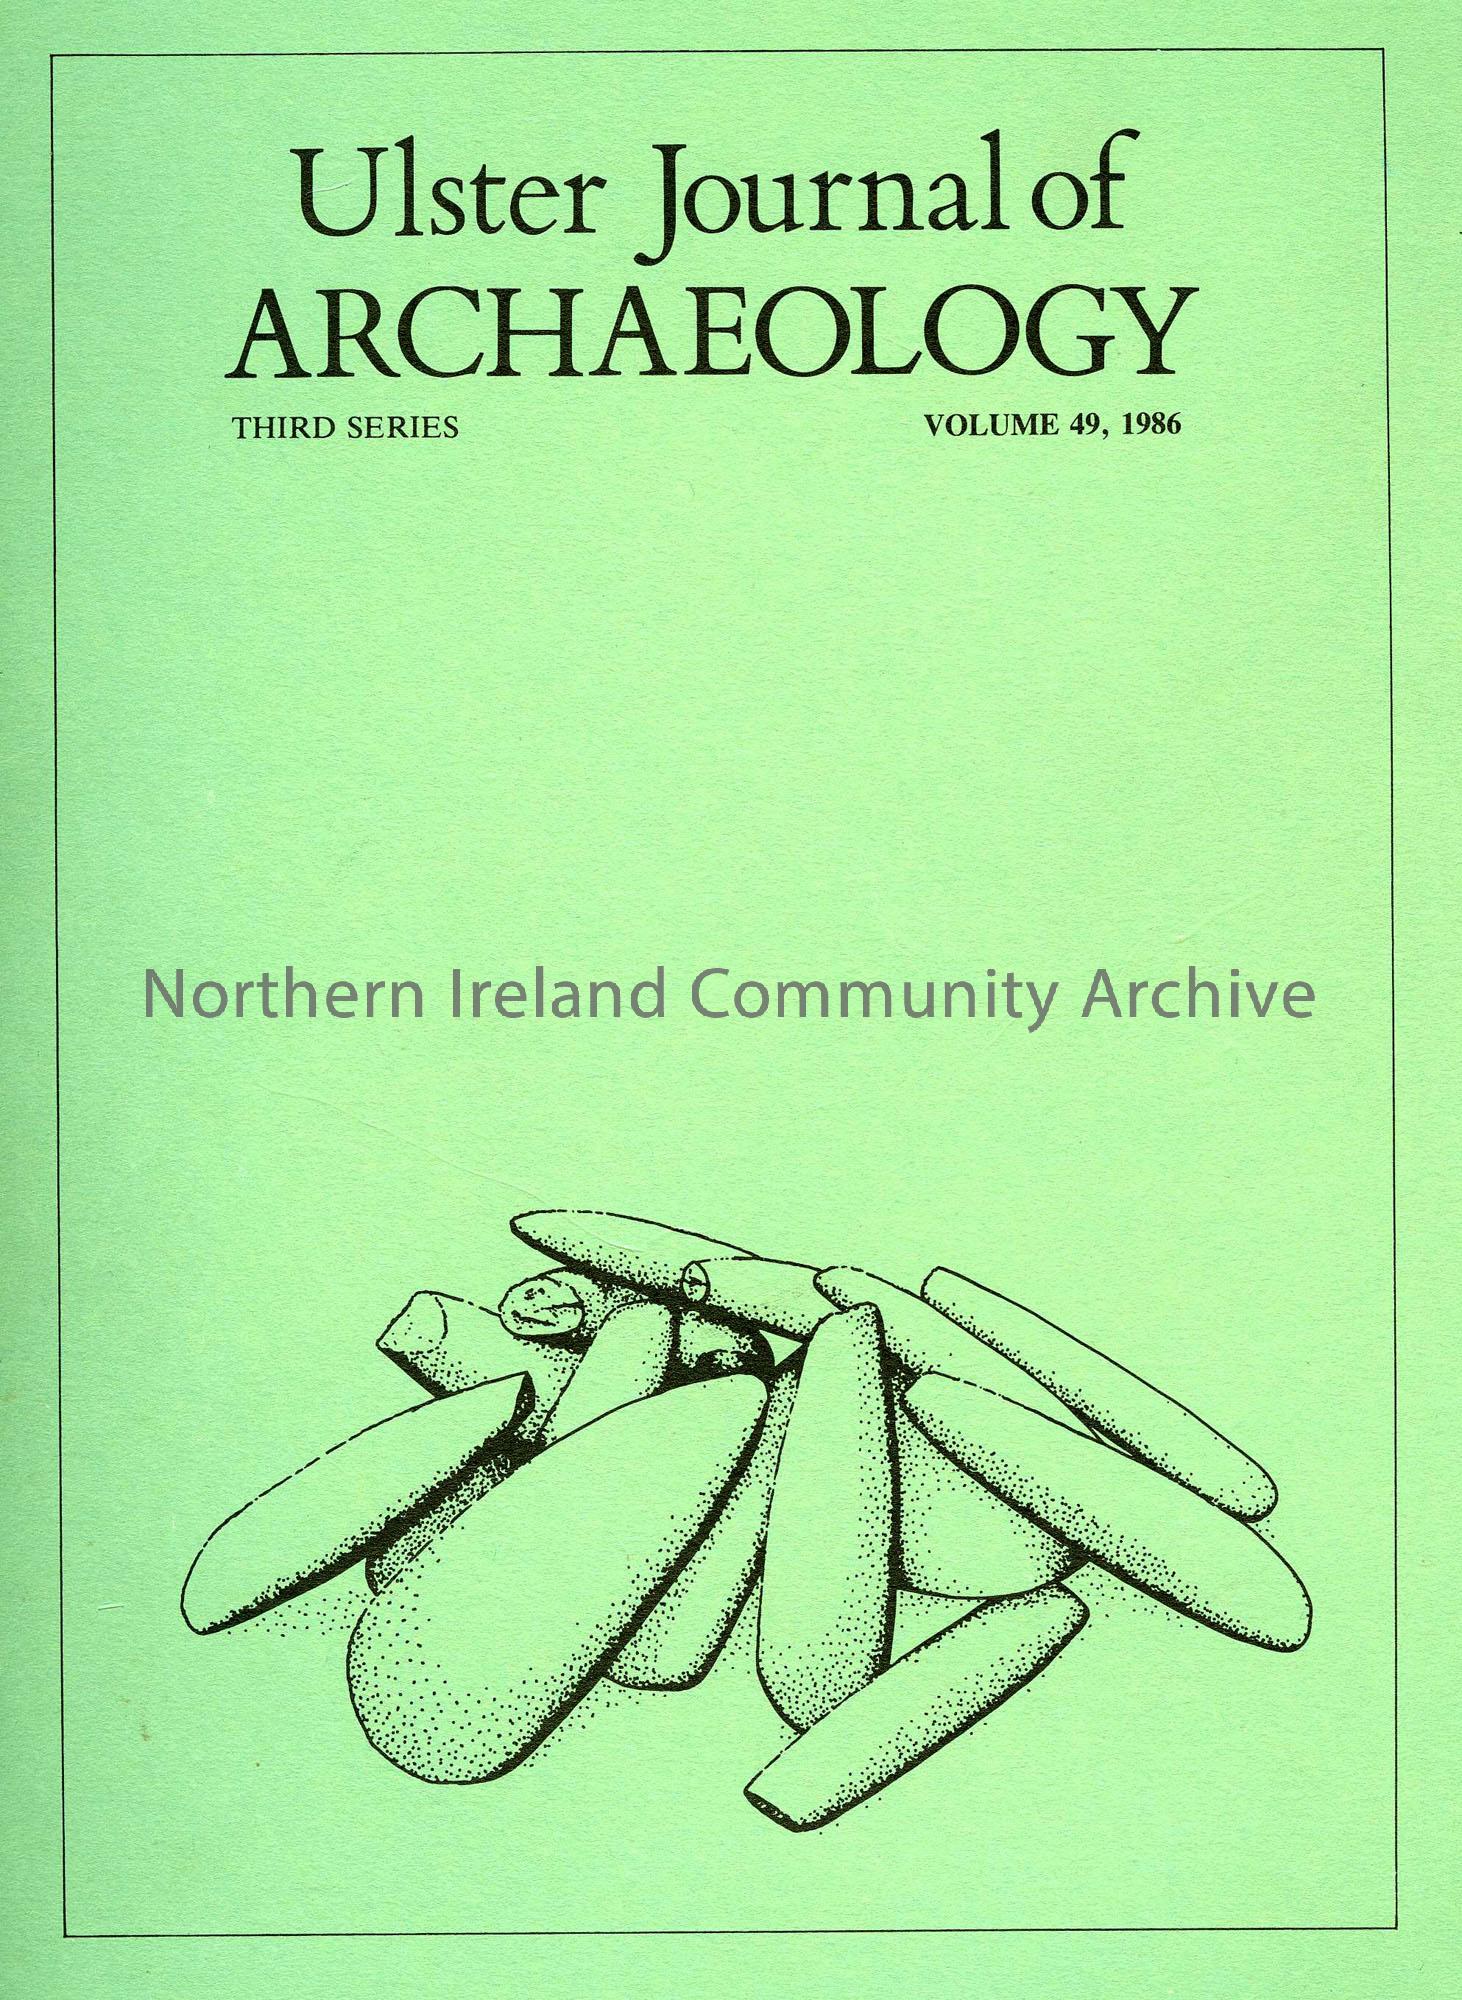 book titled, Ulster Journal of Archaeology. Third Series Volume 49, 1986 (5589)